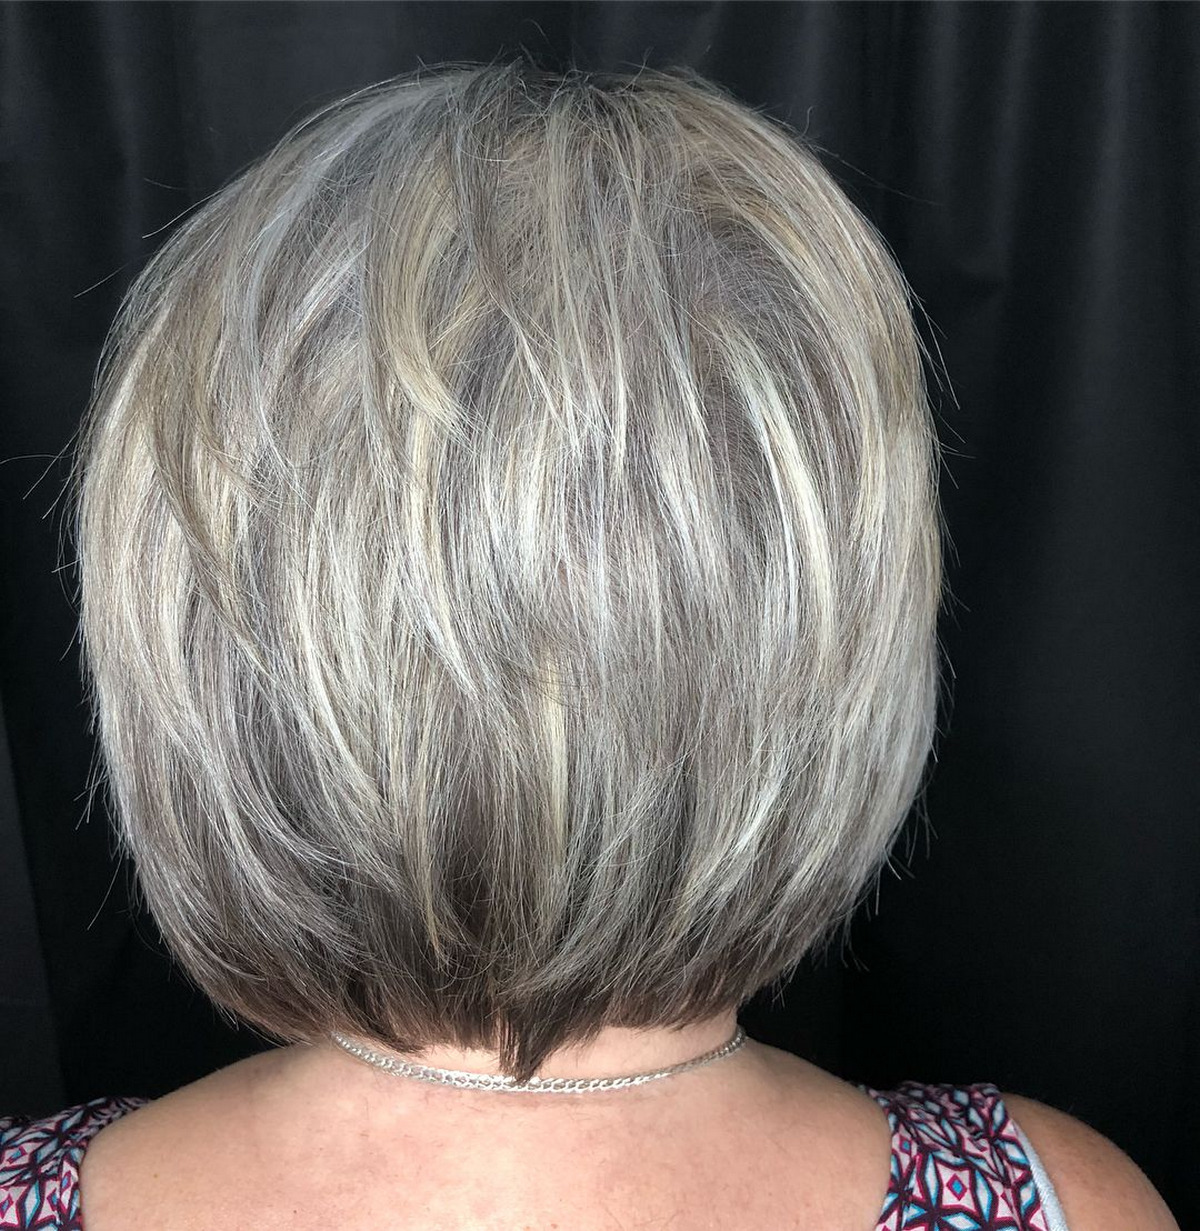 Feathered Style With White Highlights Short Hair